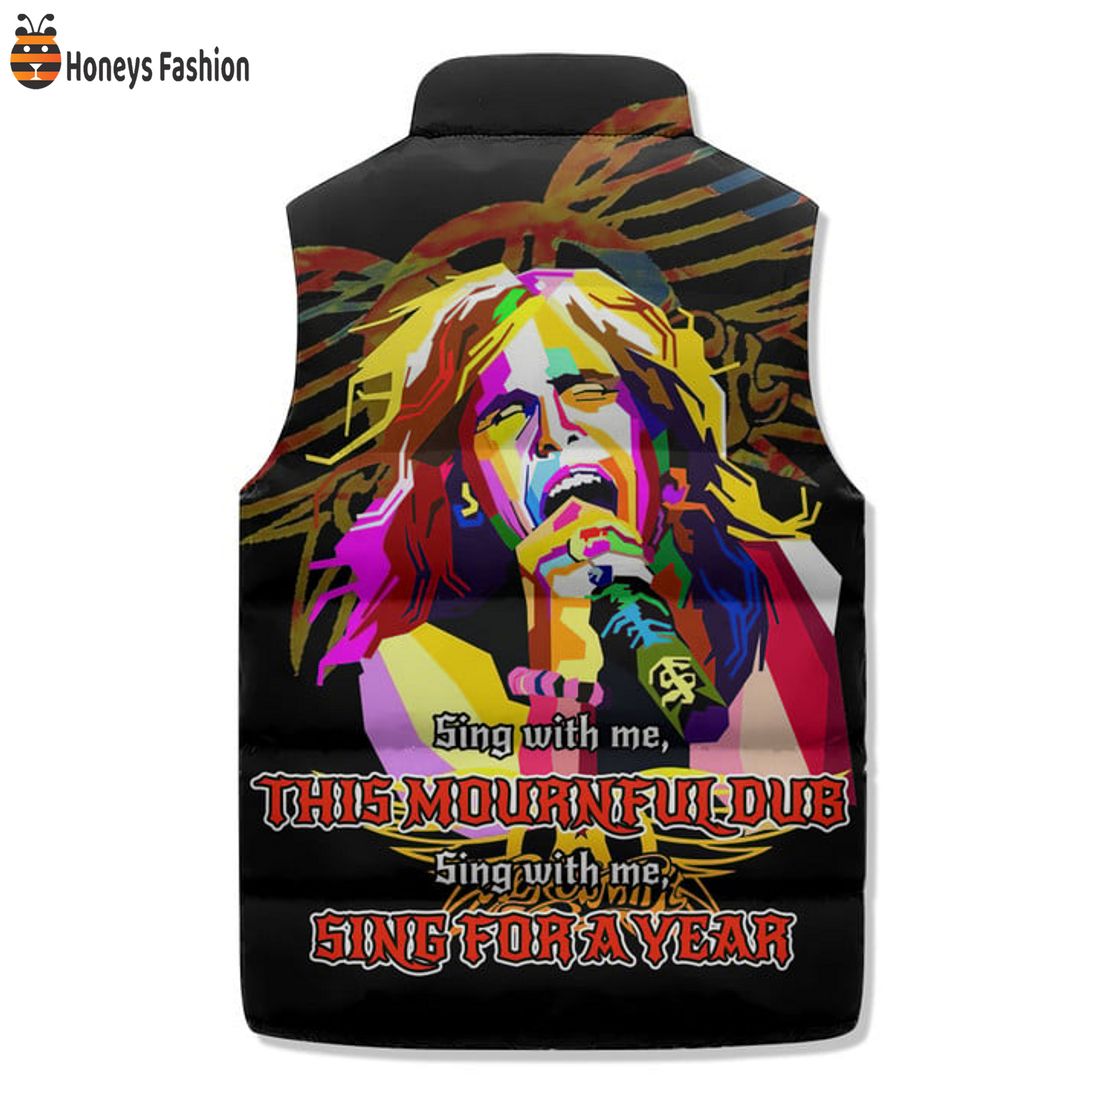 TRENDING Steven Tyler Sing With Me Sing For A Year Puffer Sleeveless Jacket